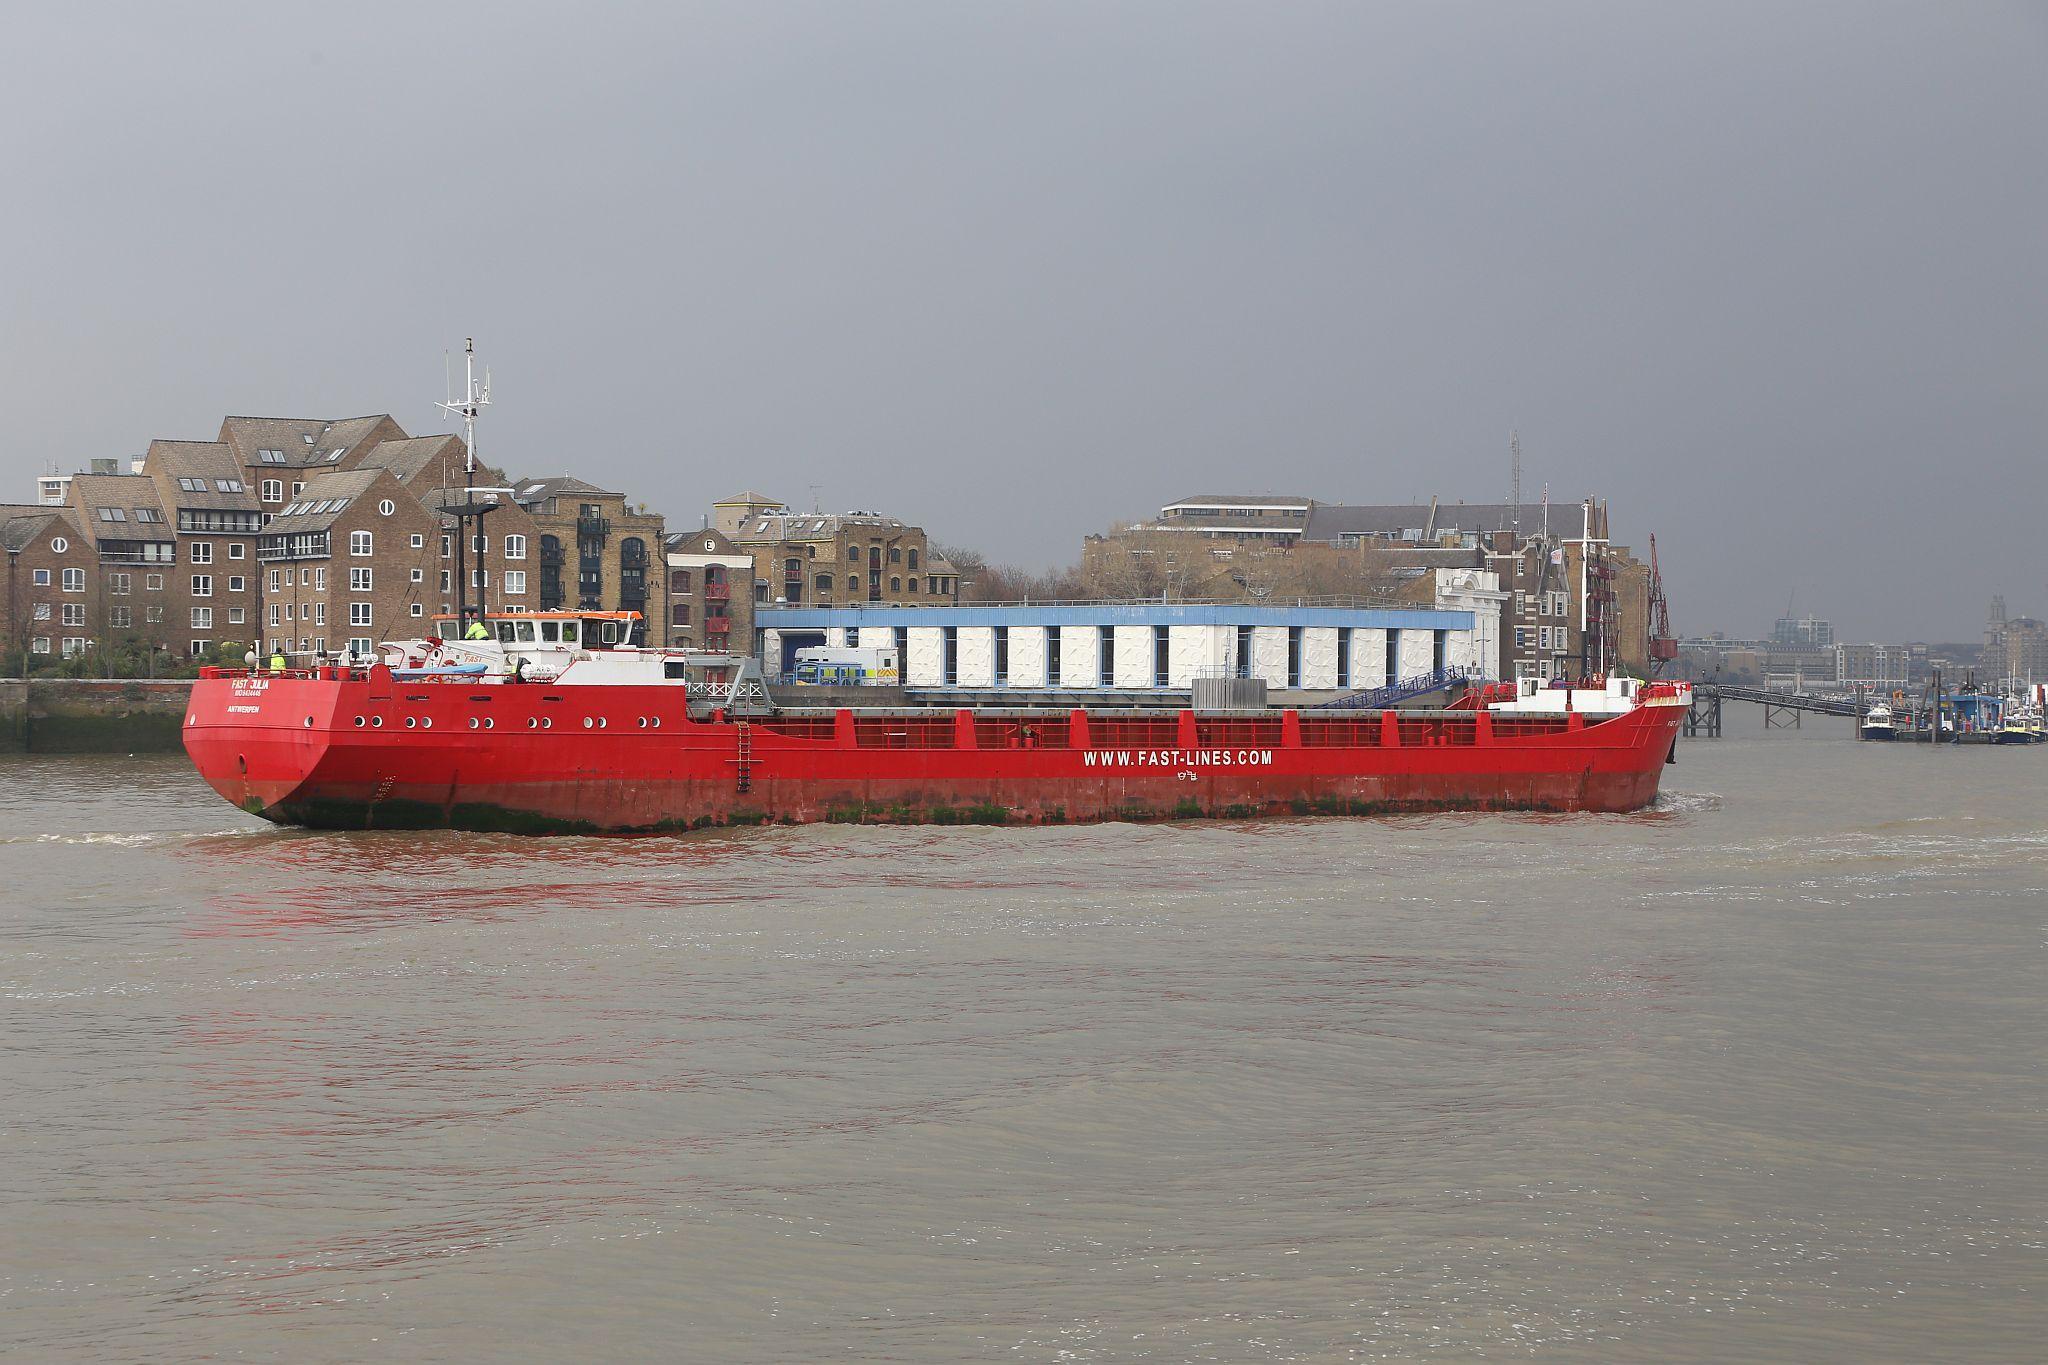 Ship "Fast Julia" owned by Fast Lines on the River Thames in London, 24-Mar-2018